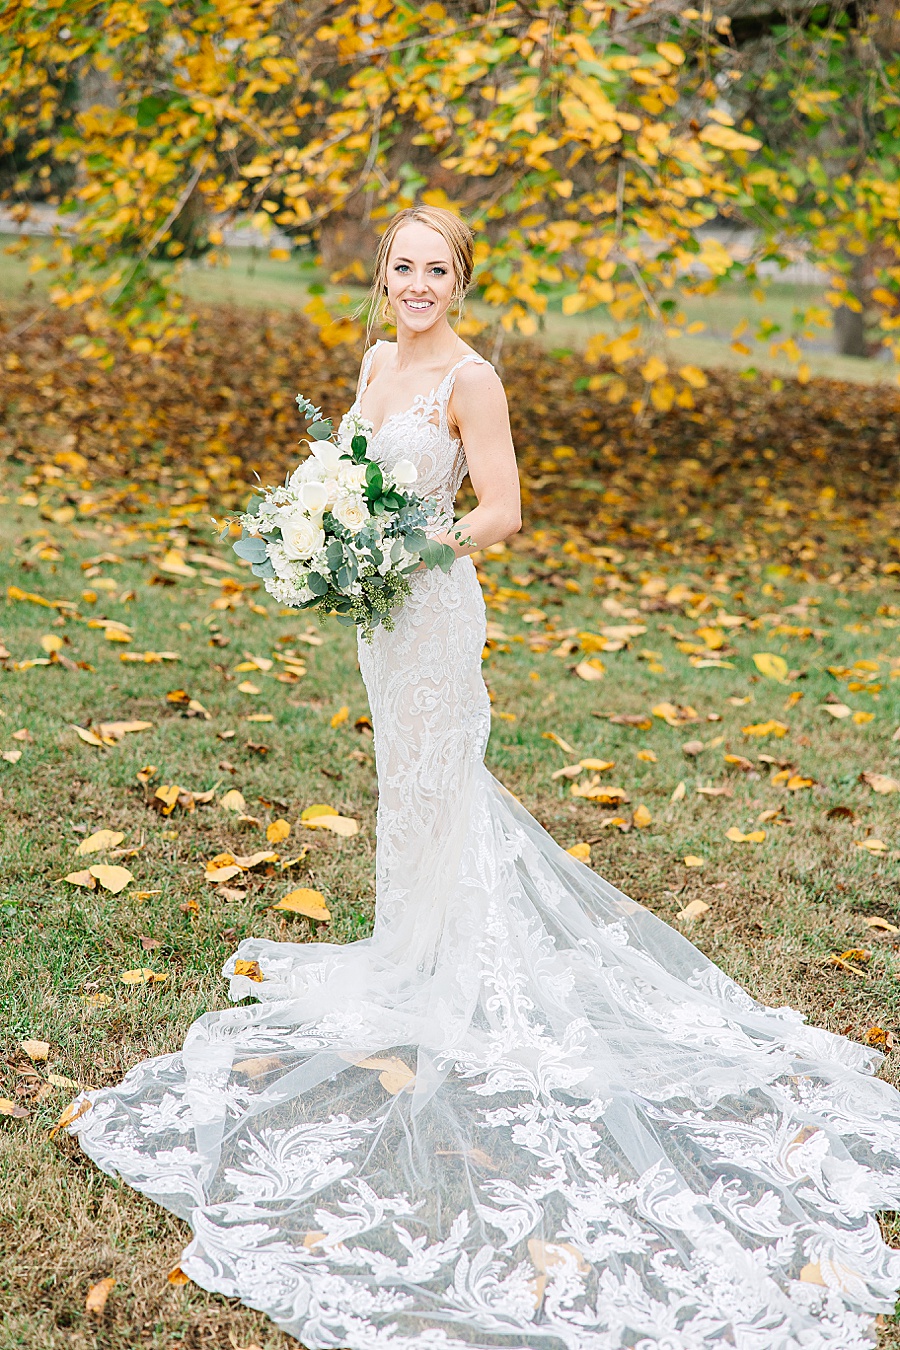 Bridal portrait at park wedding in Knoxville TN by Mandy Hart Photo, Knoxville TN Wedding Photographer